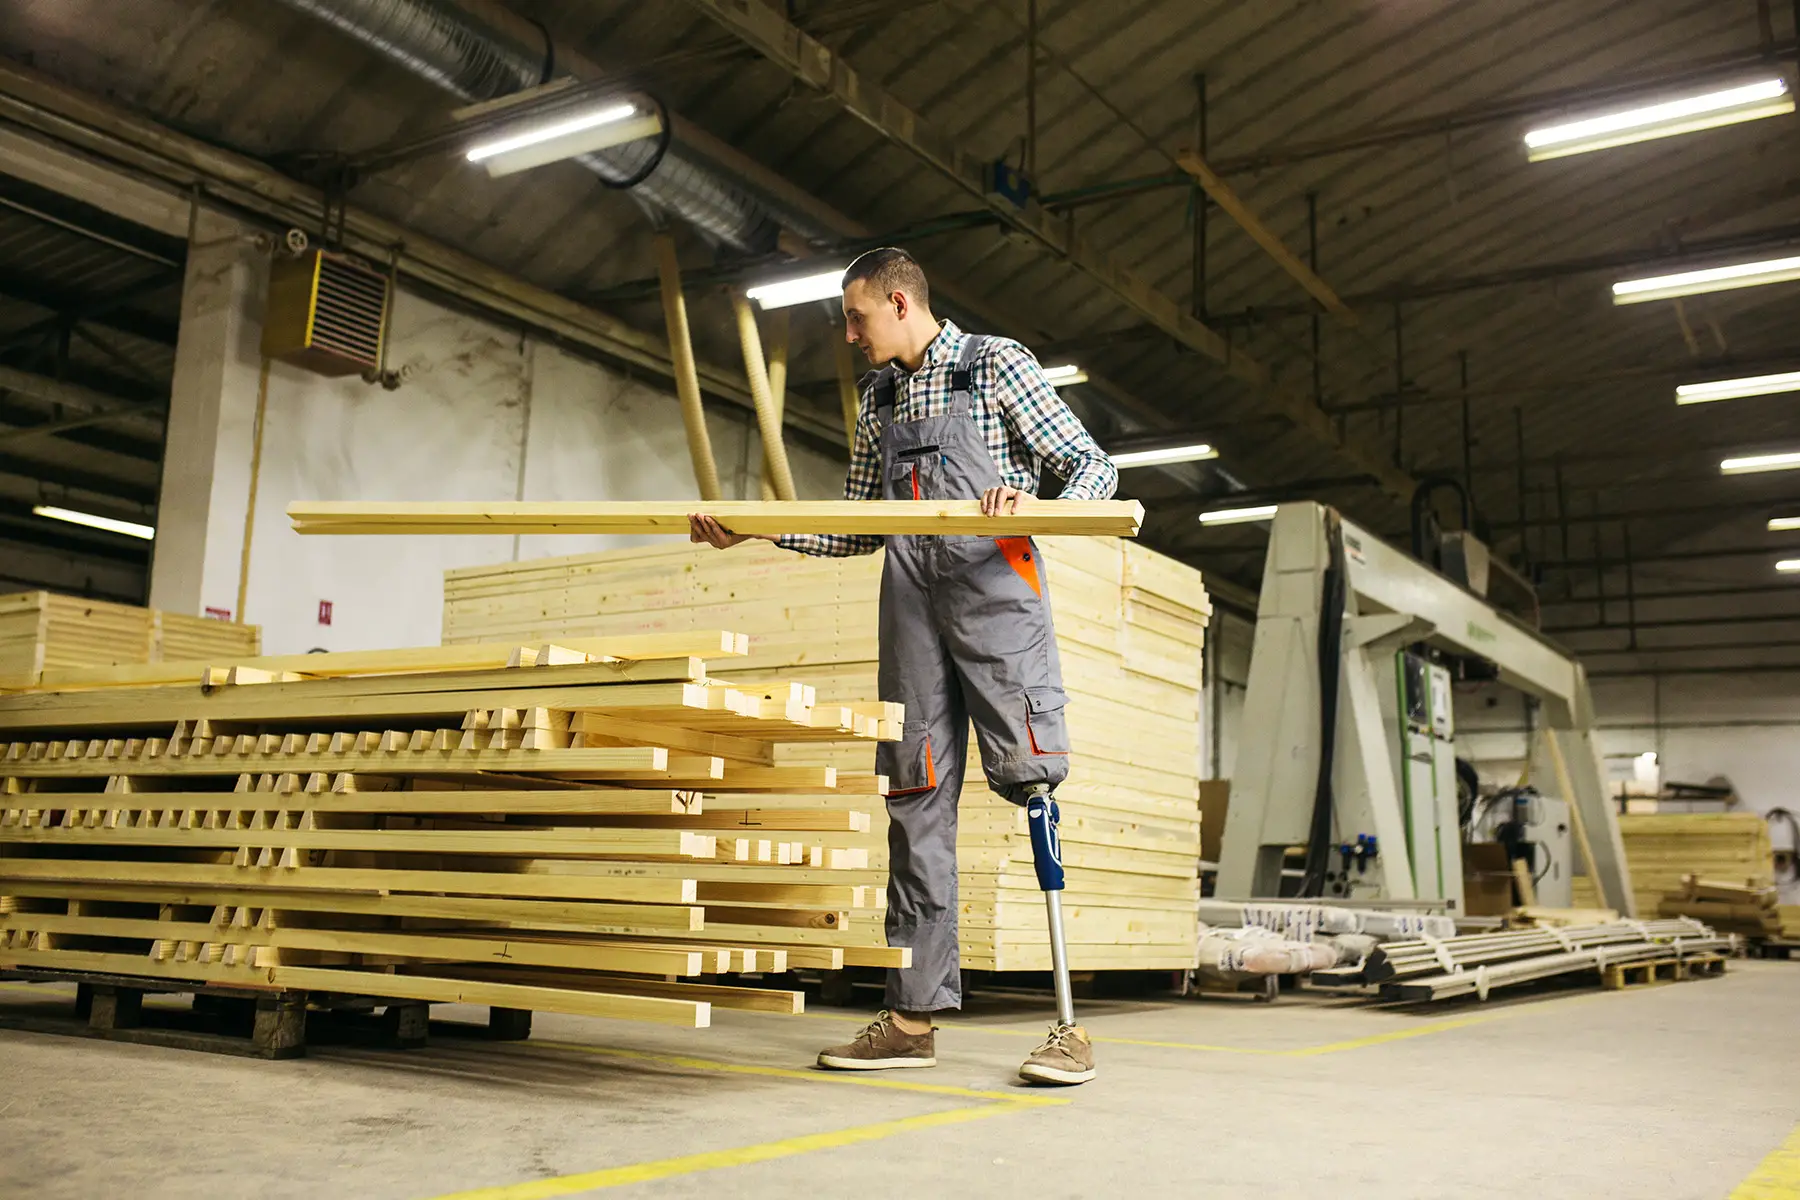 Carpenter with prosthetic leg choosing a plank from pile in warehouse